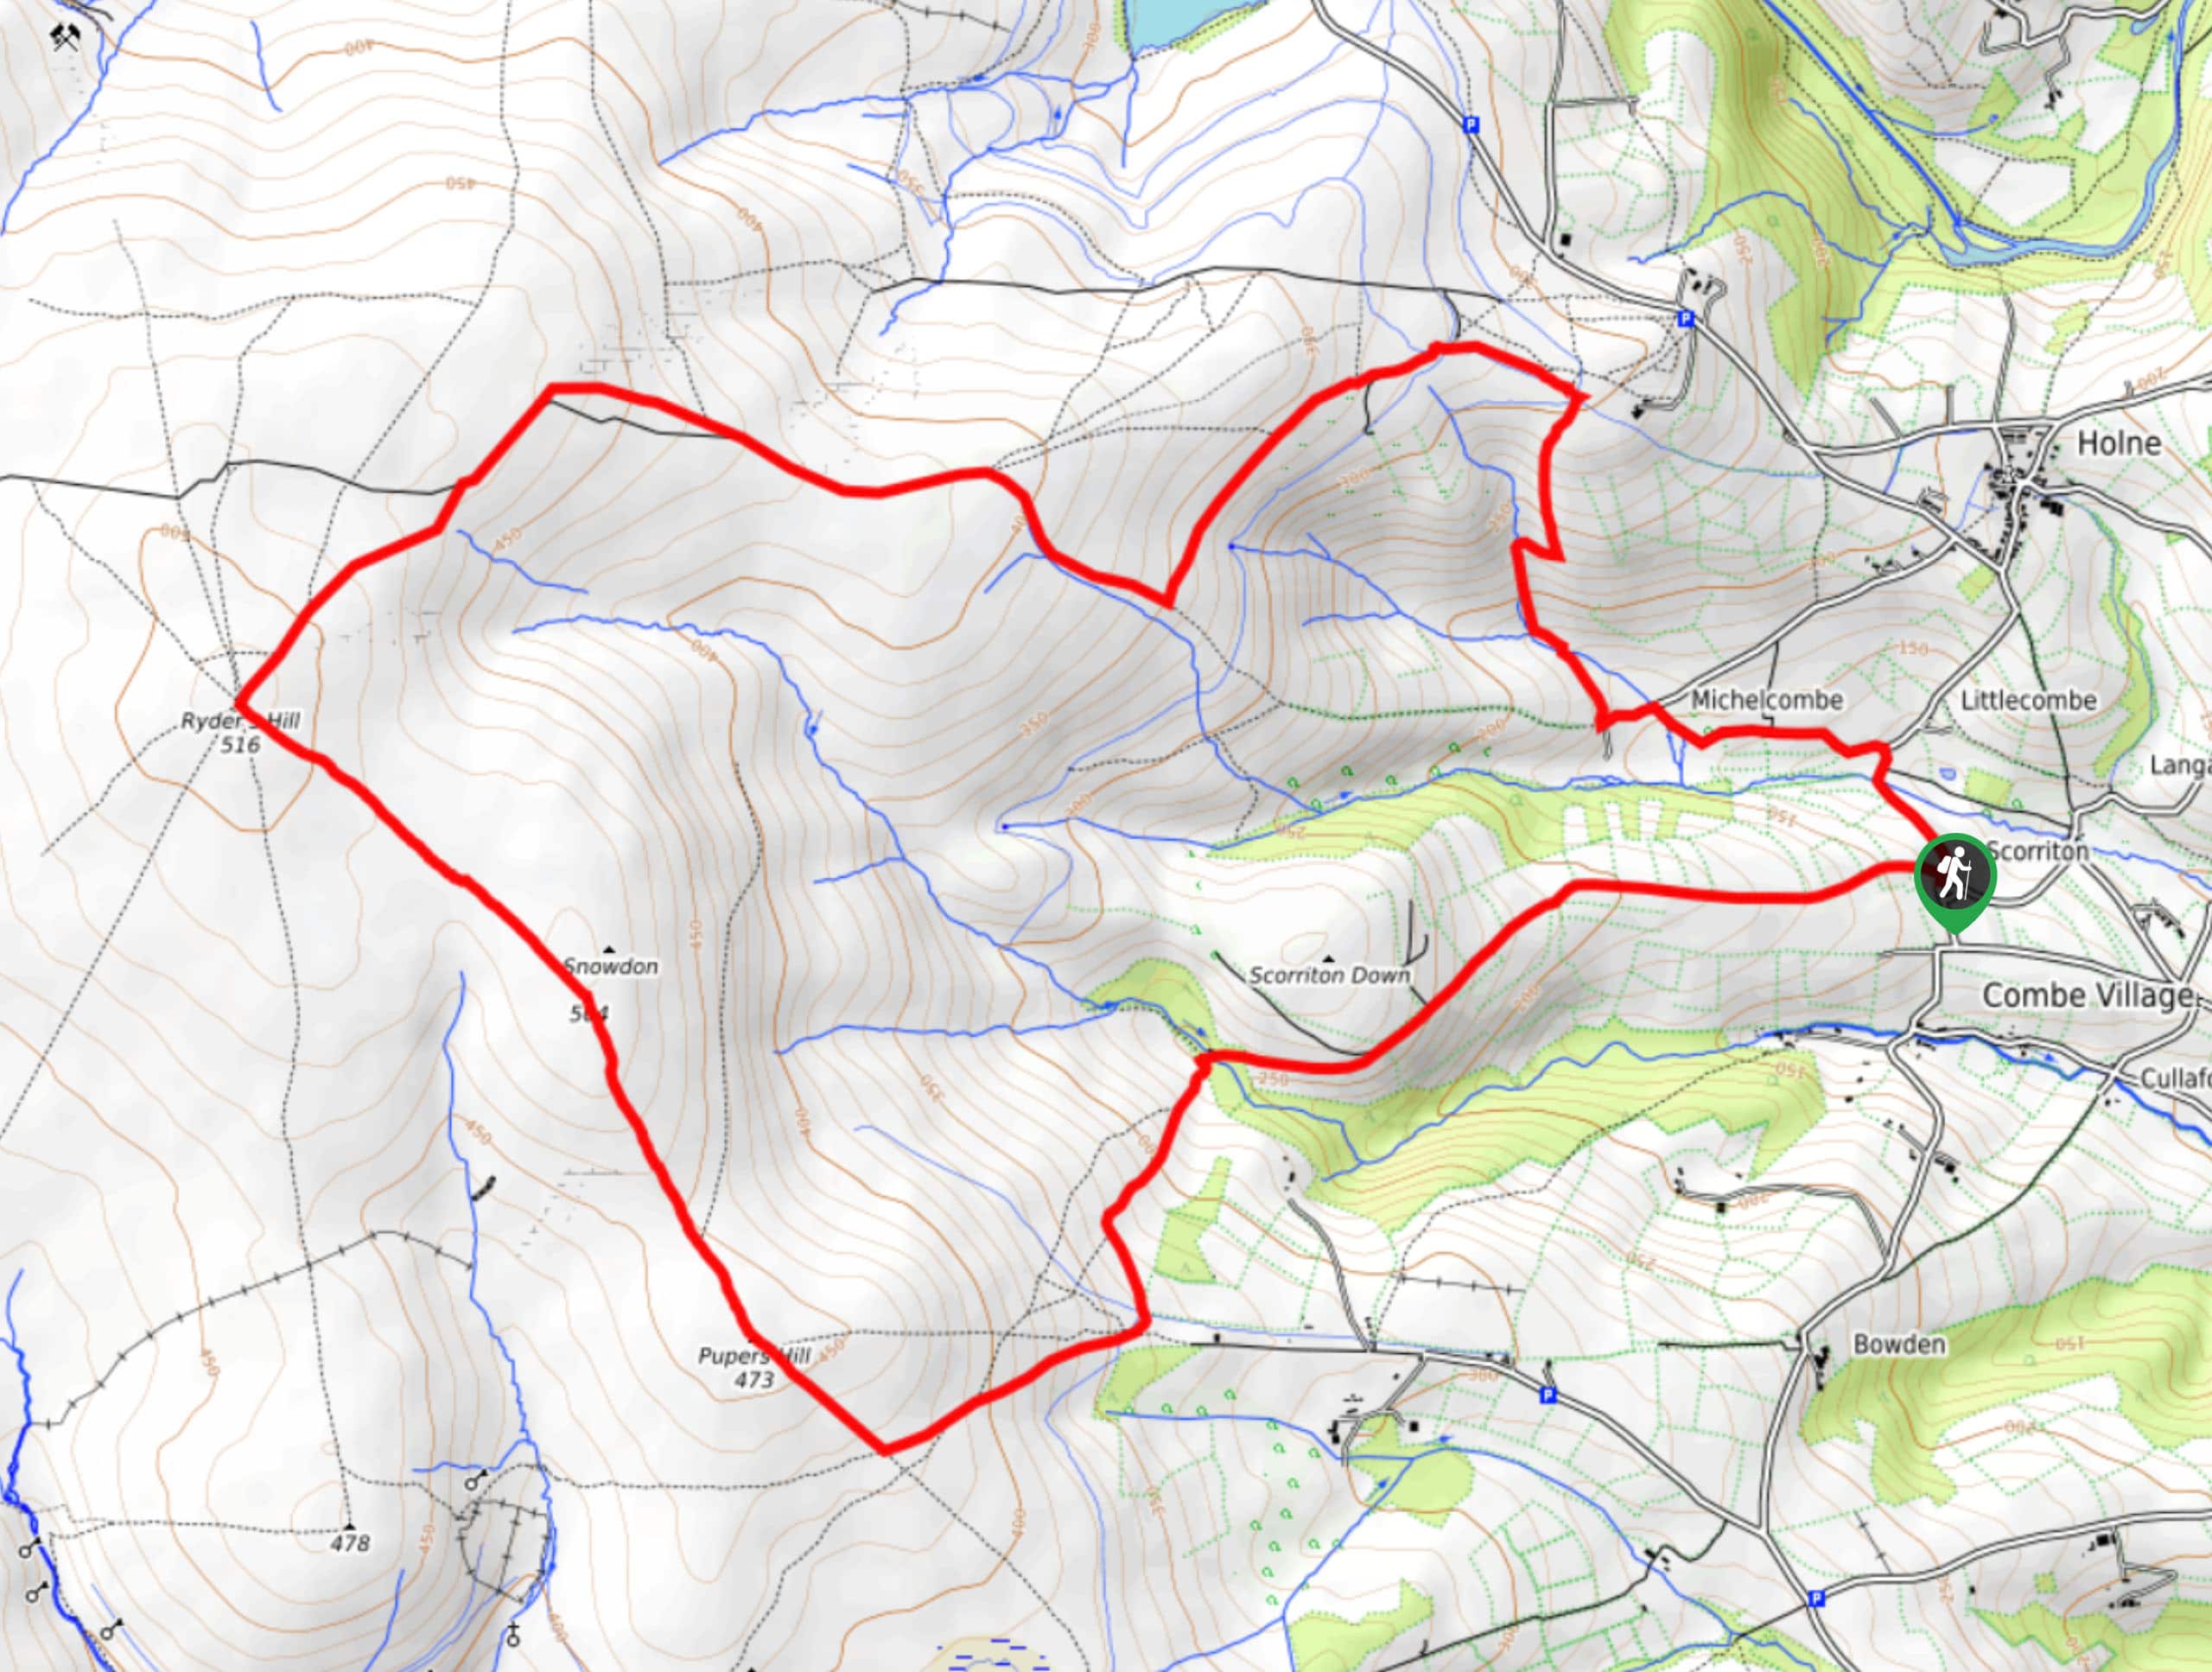 Ryder’s Hill, Snowdon, Pupers Hill, and Scorriton Down Walk Map